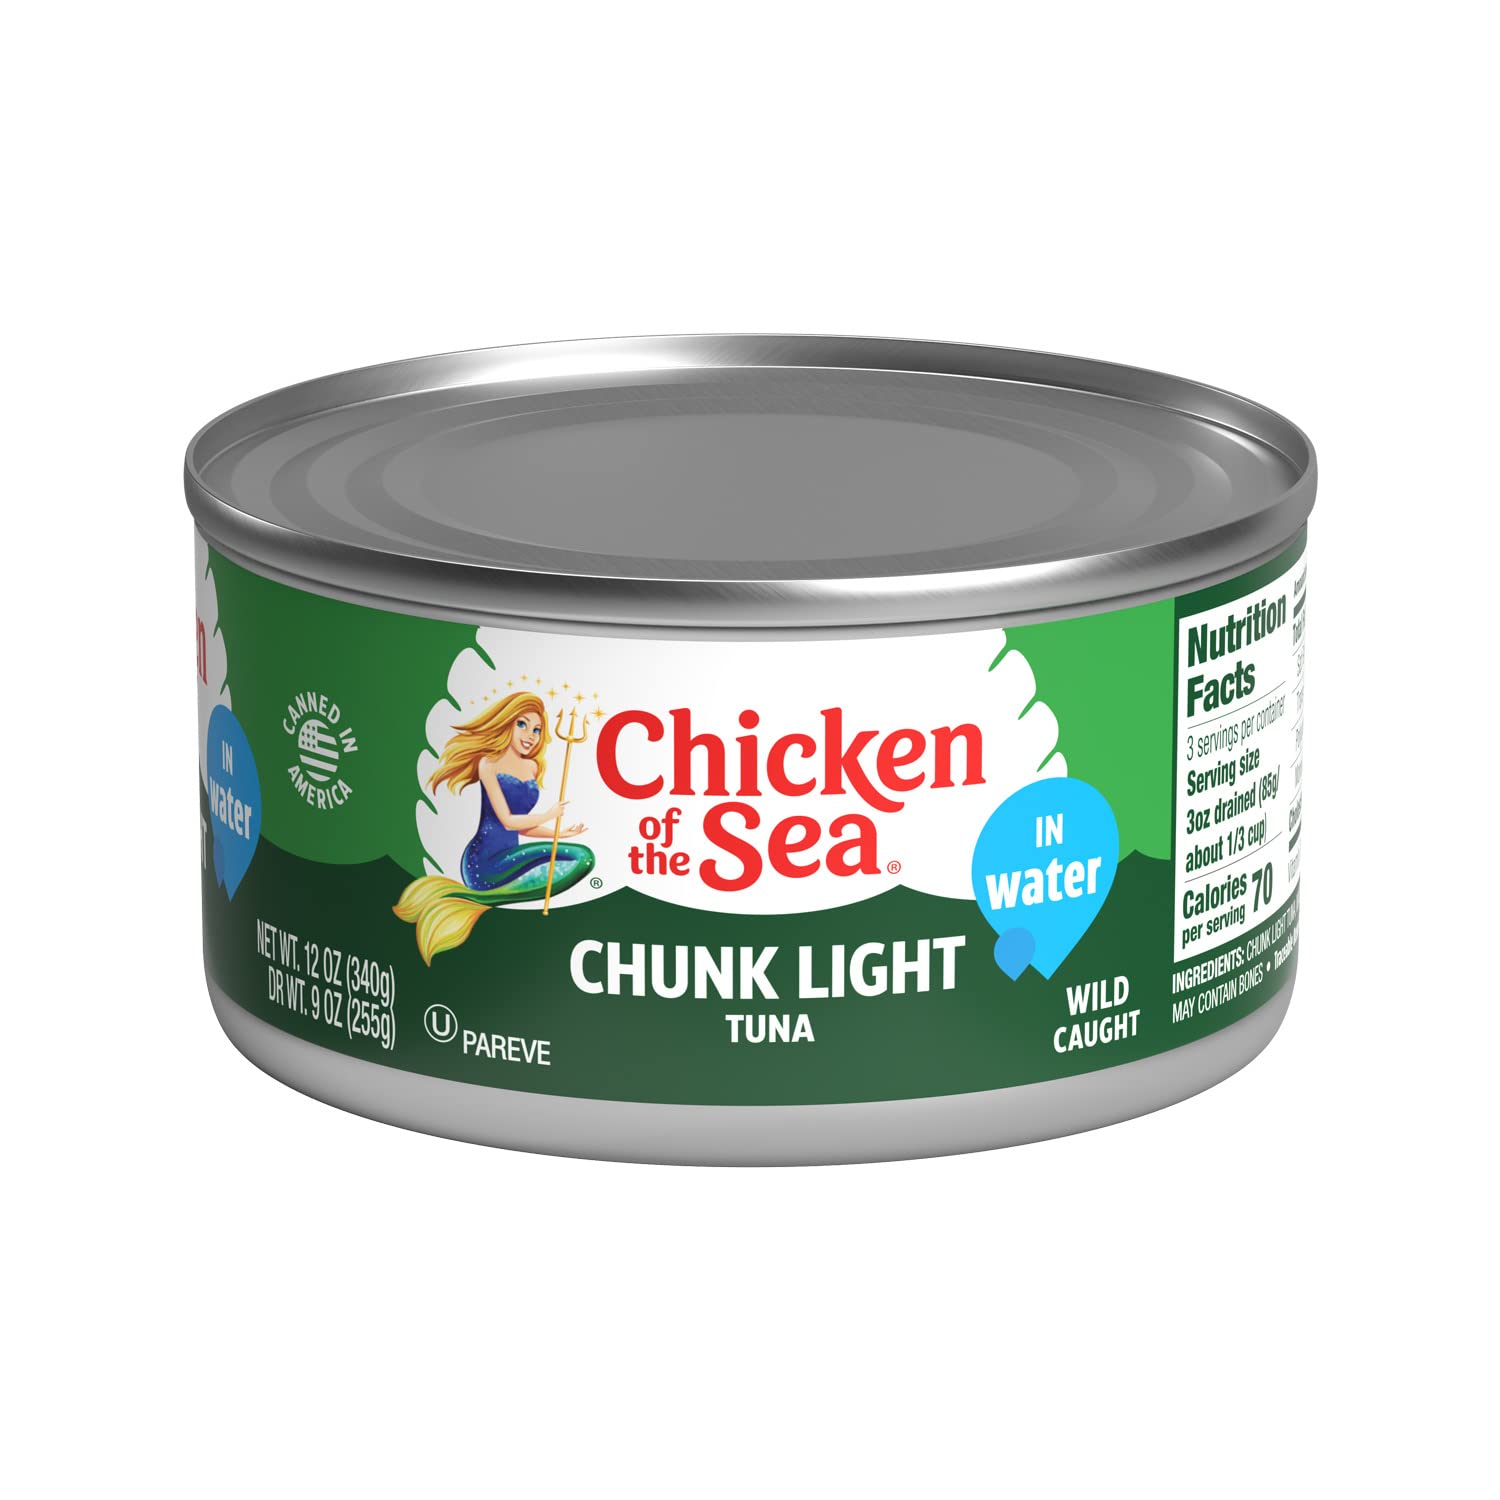 Chicken of the Sea Chunk Light Tuna in Water, Wild Caught Tuna, 12-Ounce Can (Pack of 1)